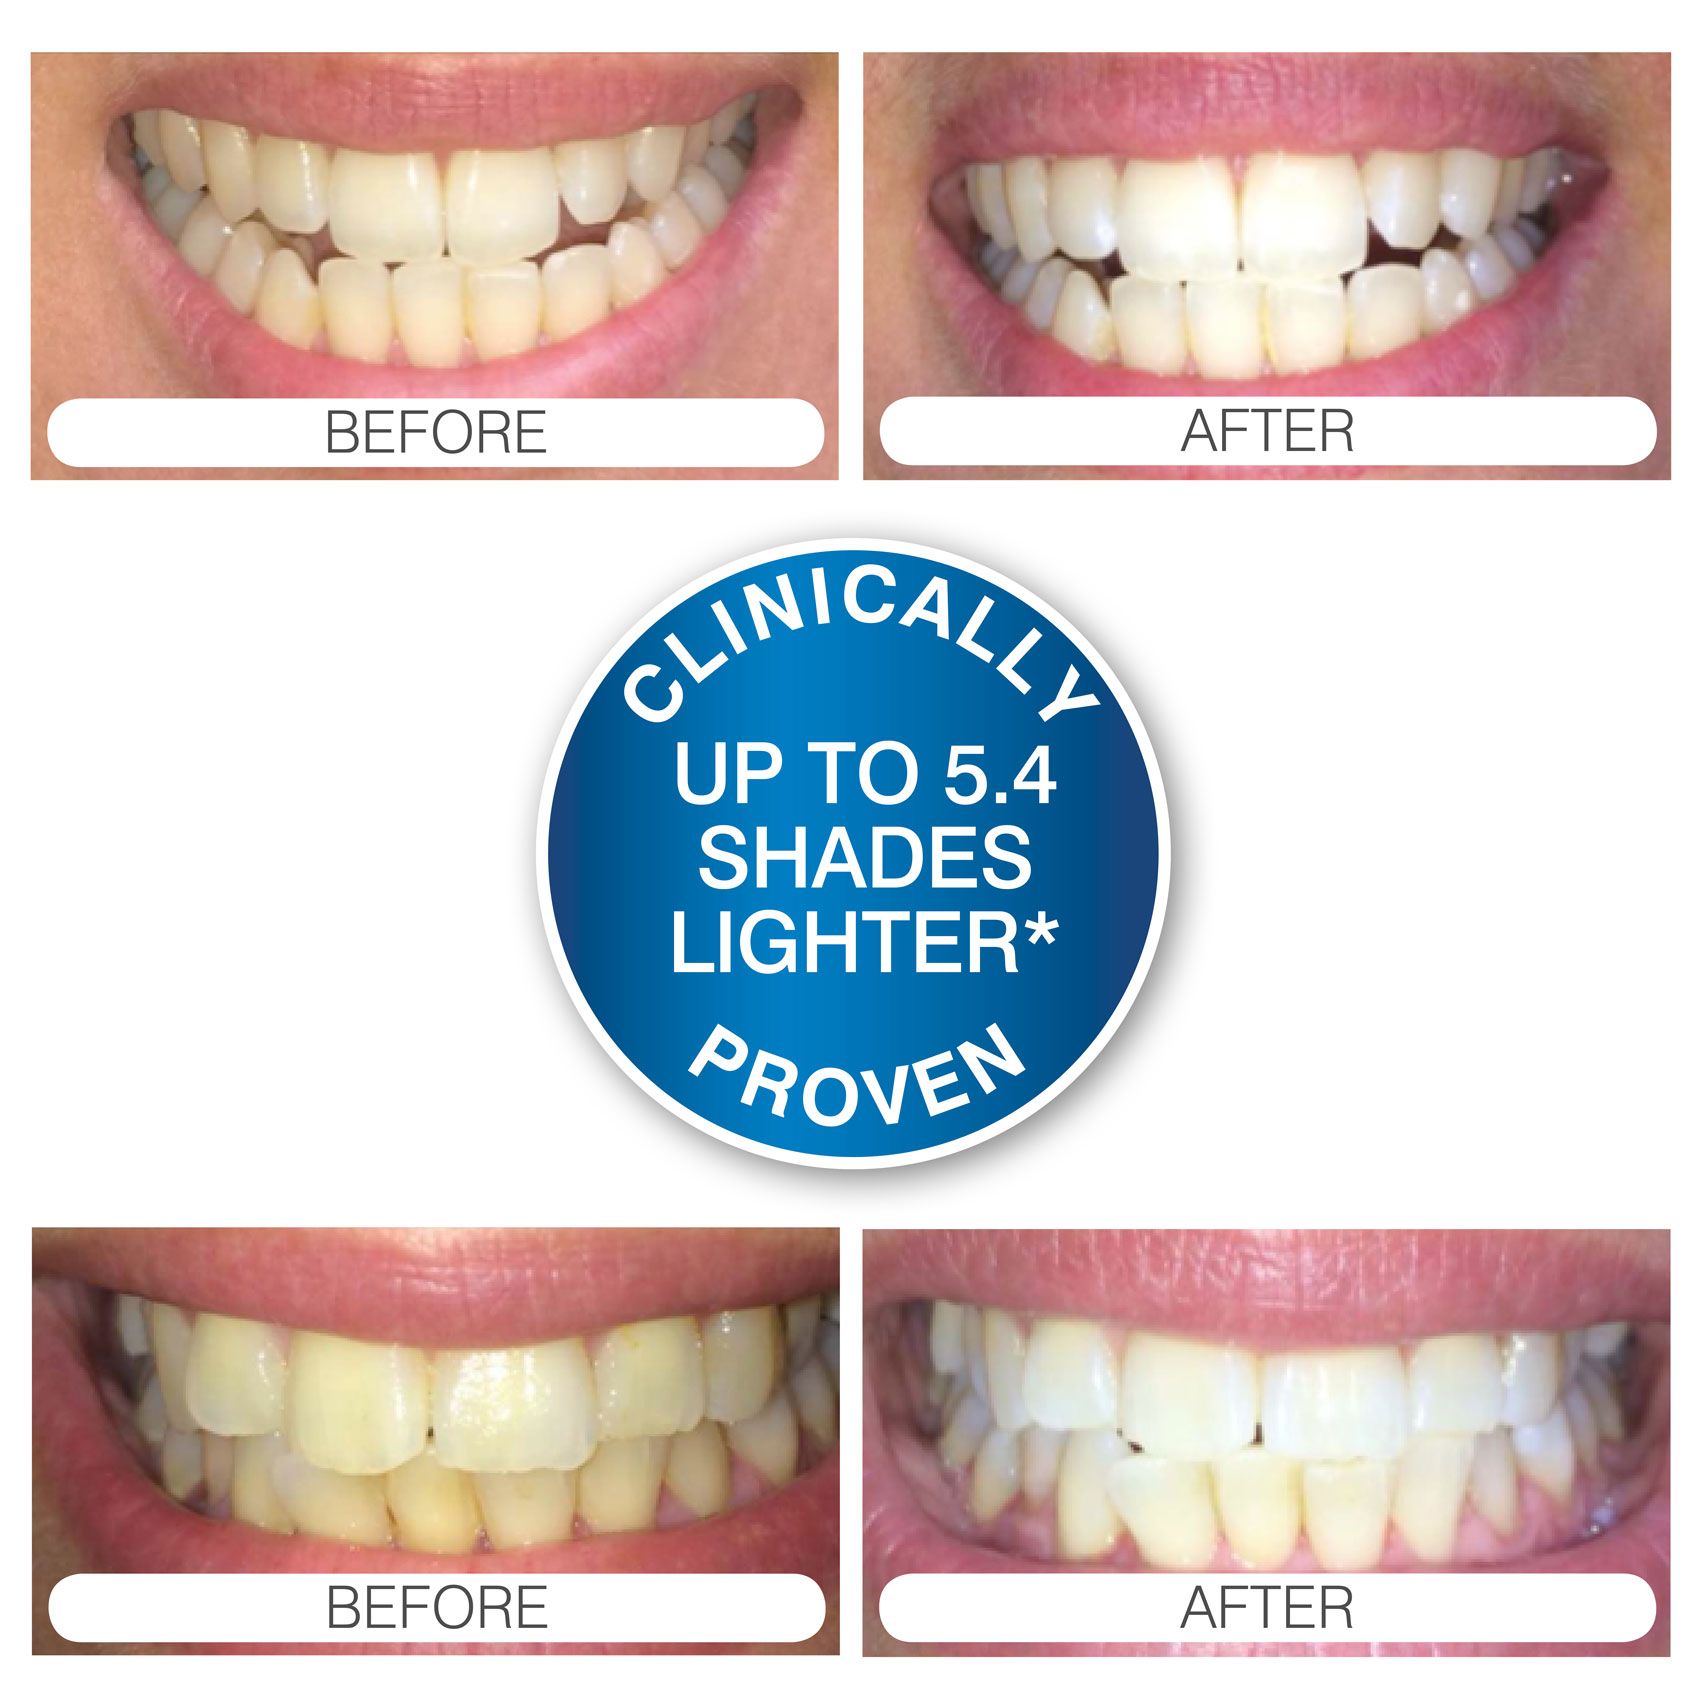 before and after case study images captioned 'clinically proven up to 5.4 shades lighter'